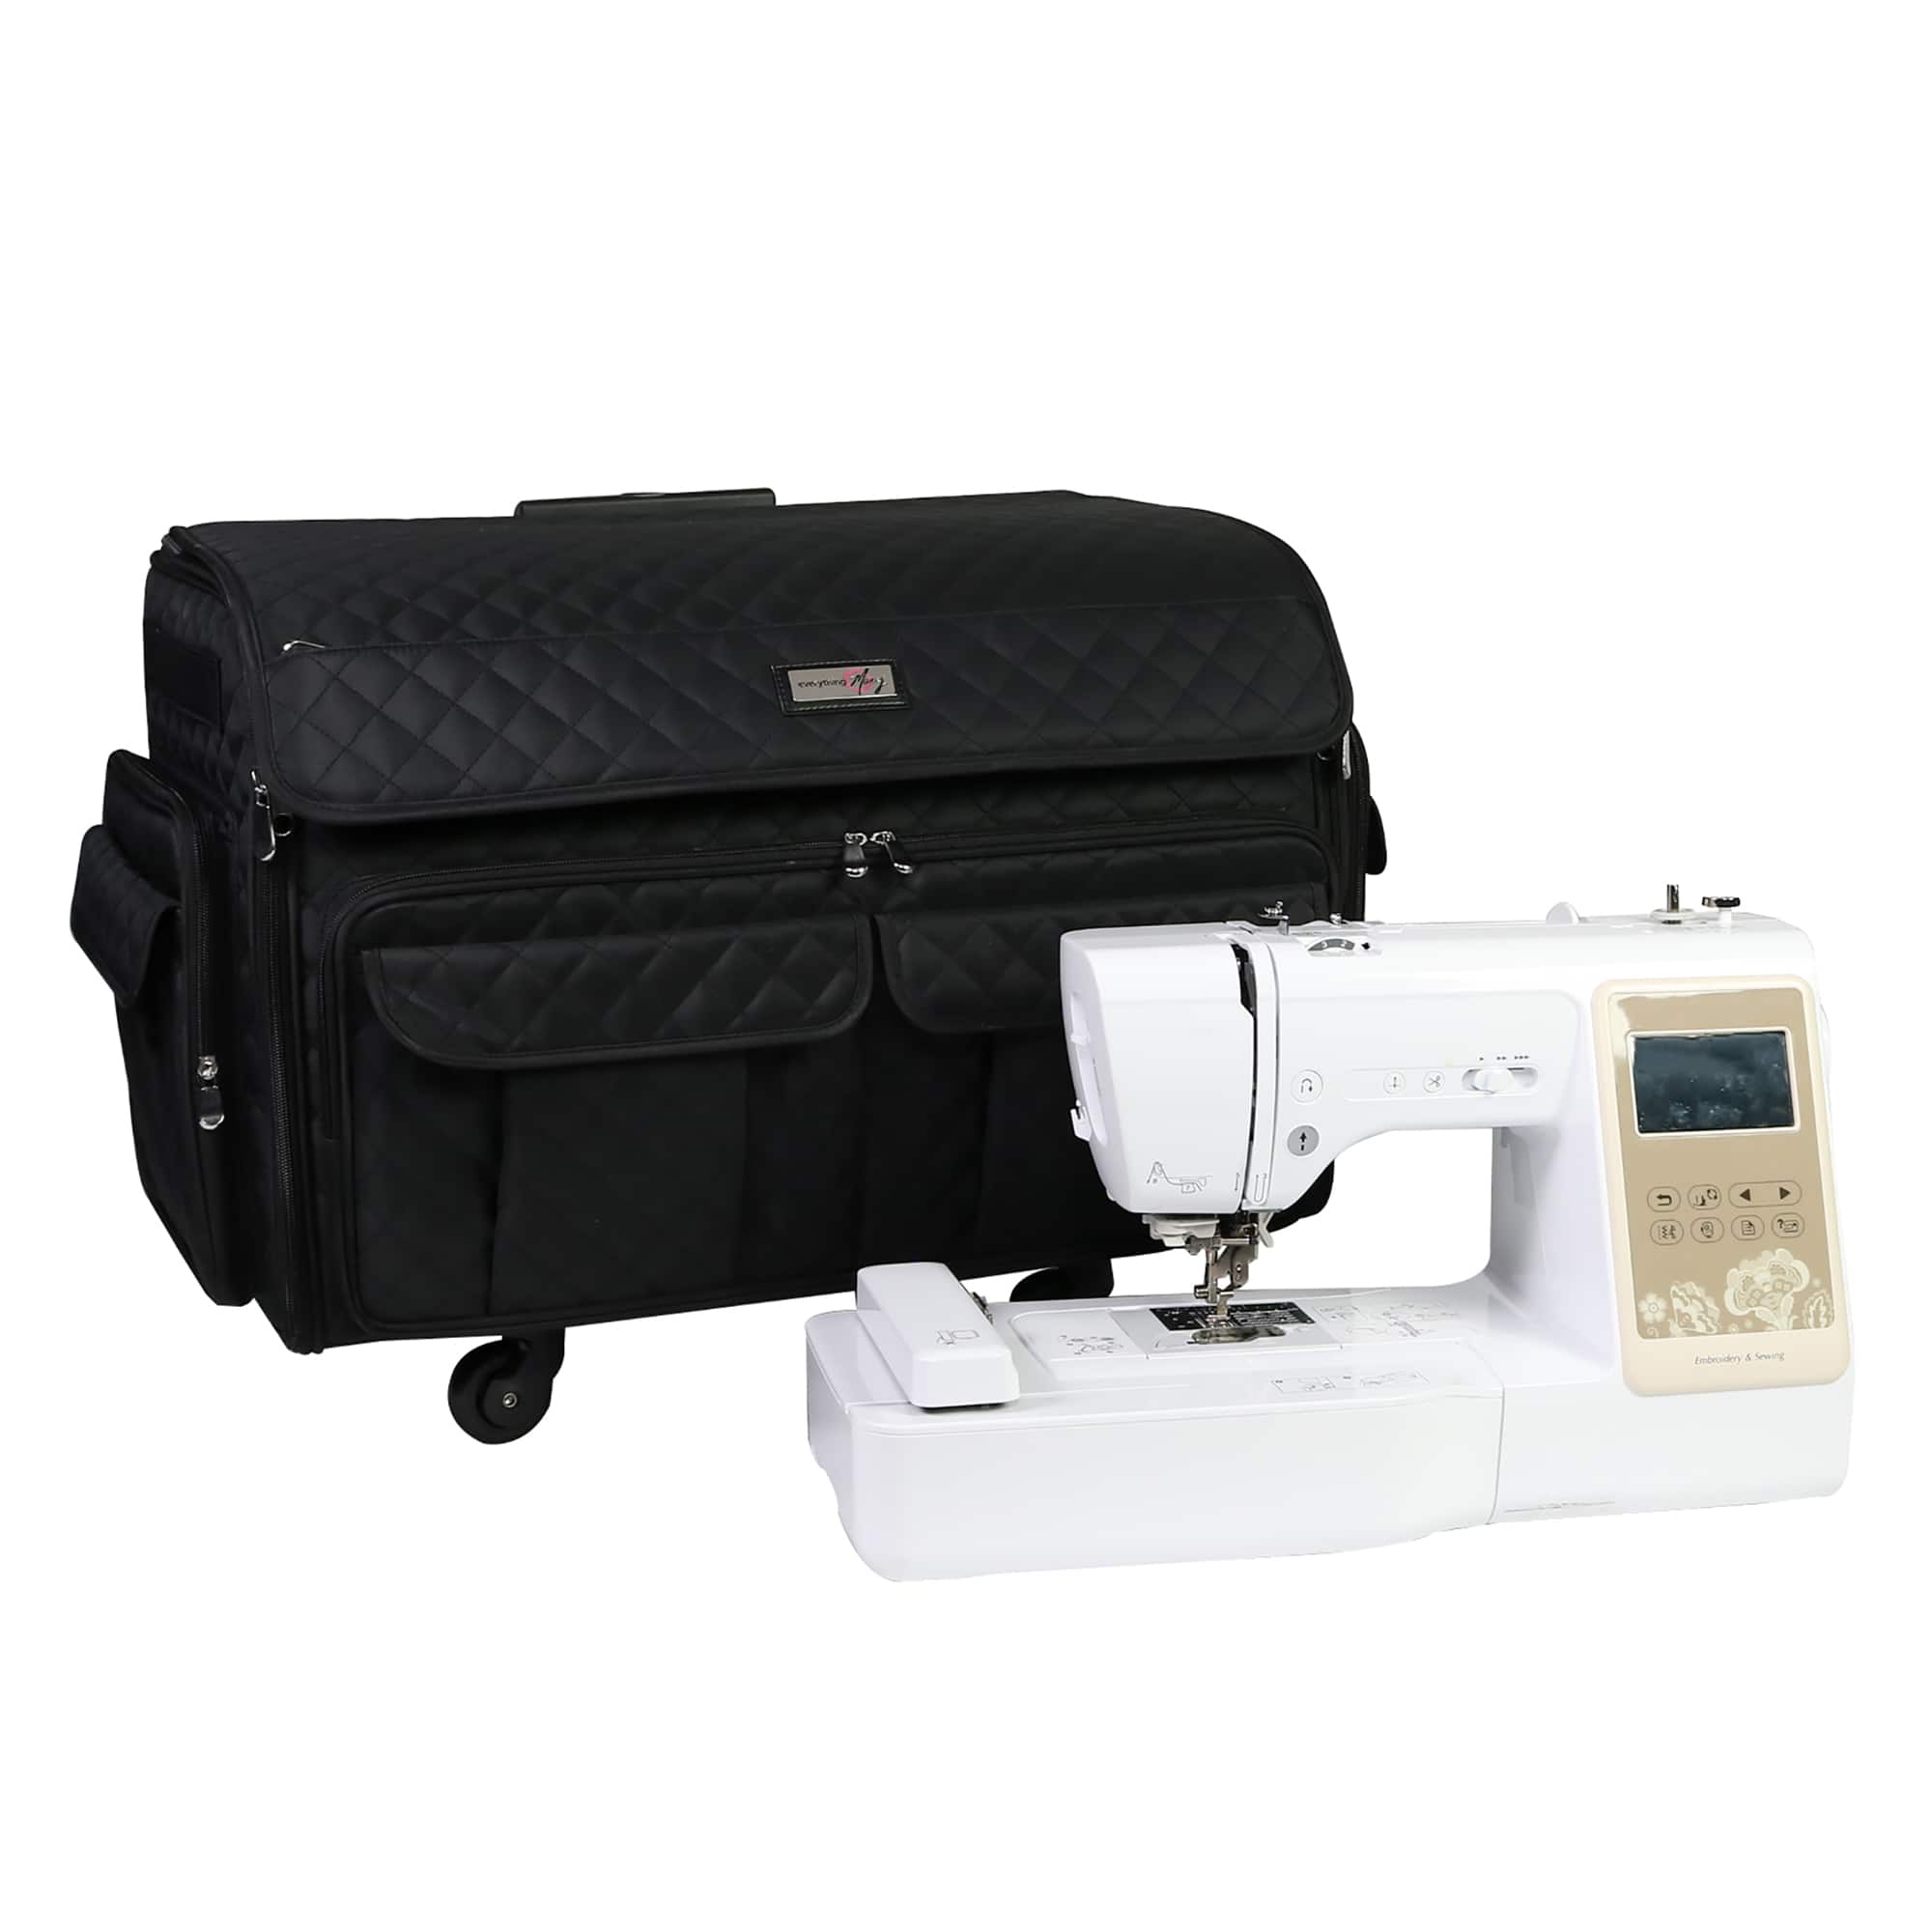 XXL Deluxe Rolling Sewing Machine Case, Black & Floral